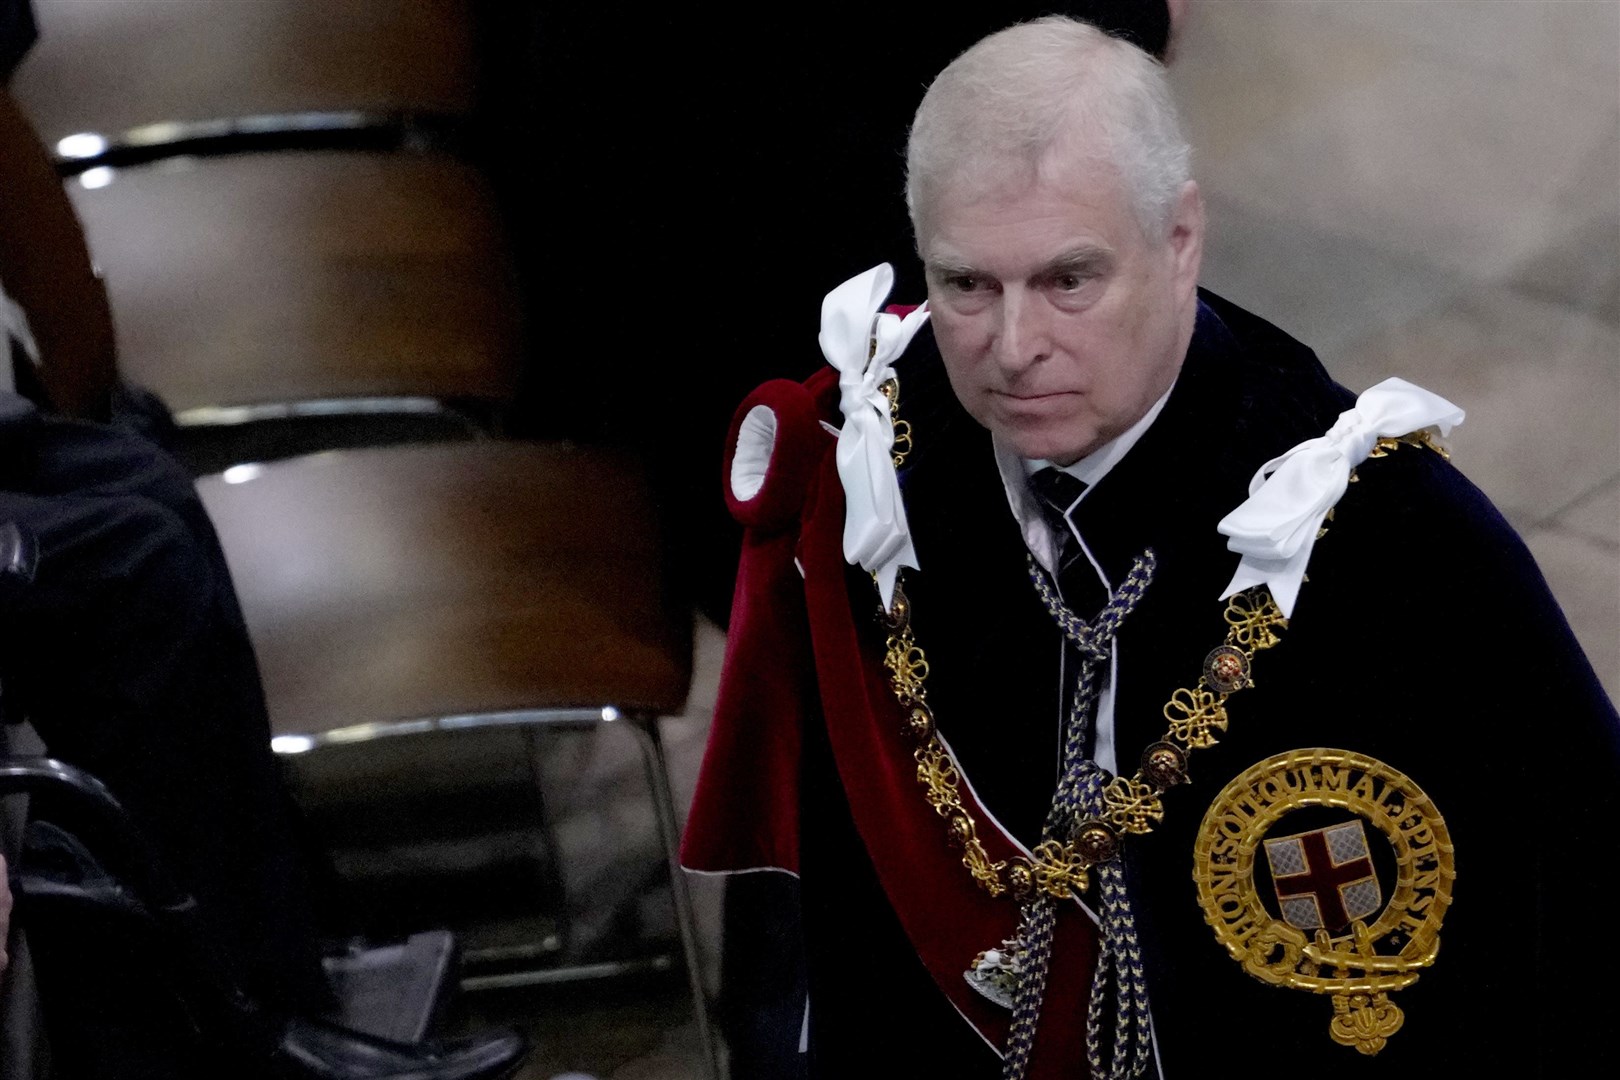 The Duke of York attending the King’s coronation (Kirsty Wigglesworth/PA)